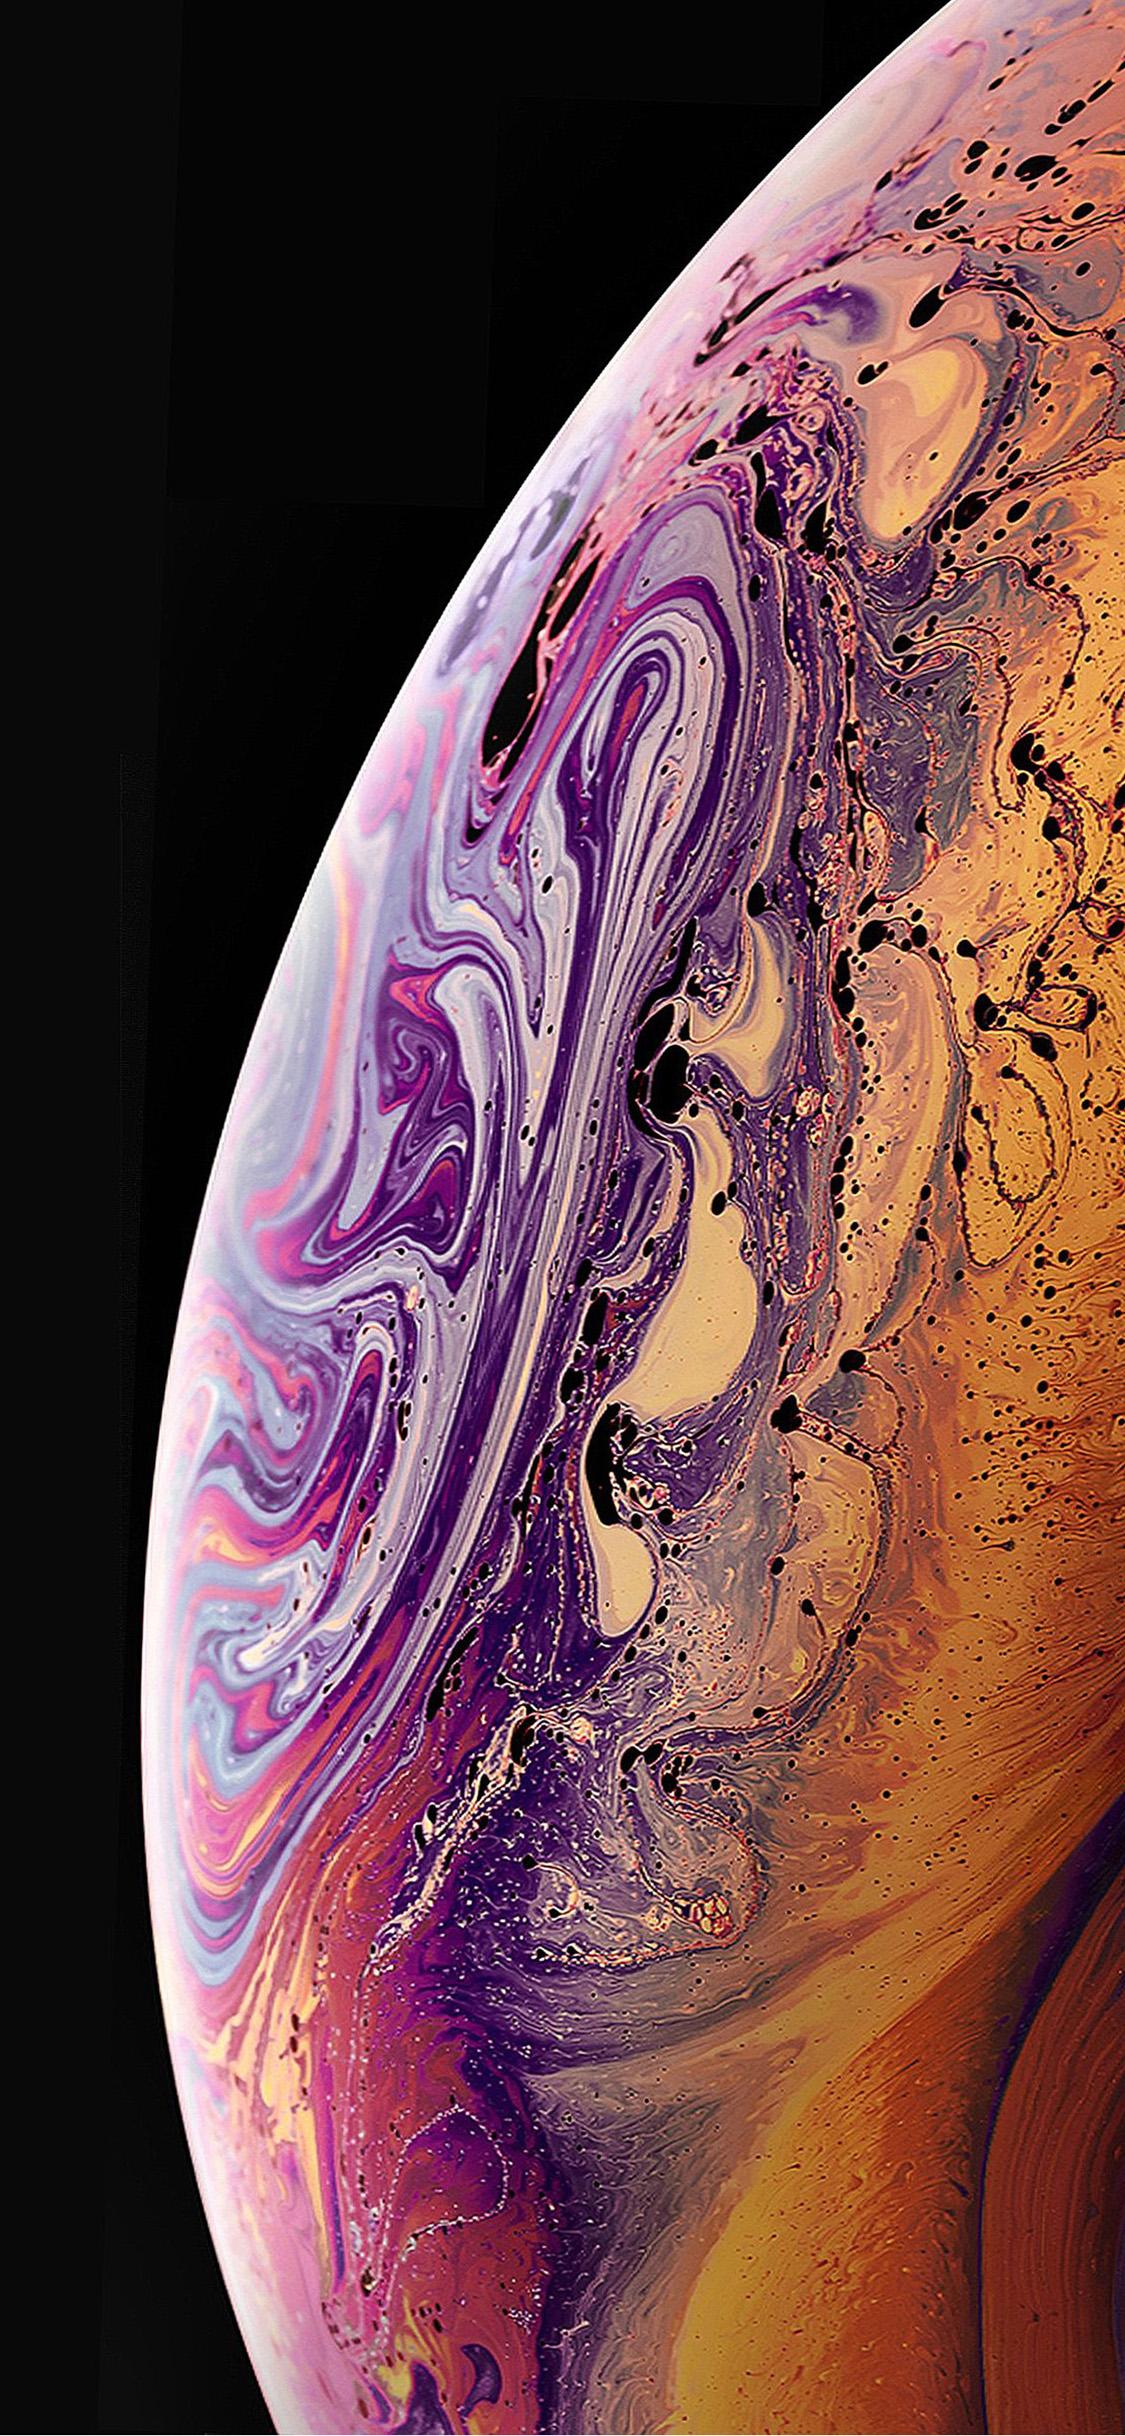 1125 x 2436 · jpeg - Trends For Download Wallpaper Iphone Xs Max Full Hd images